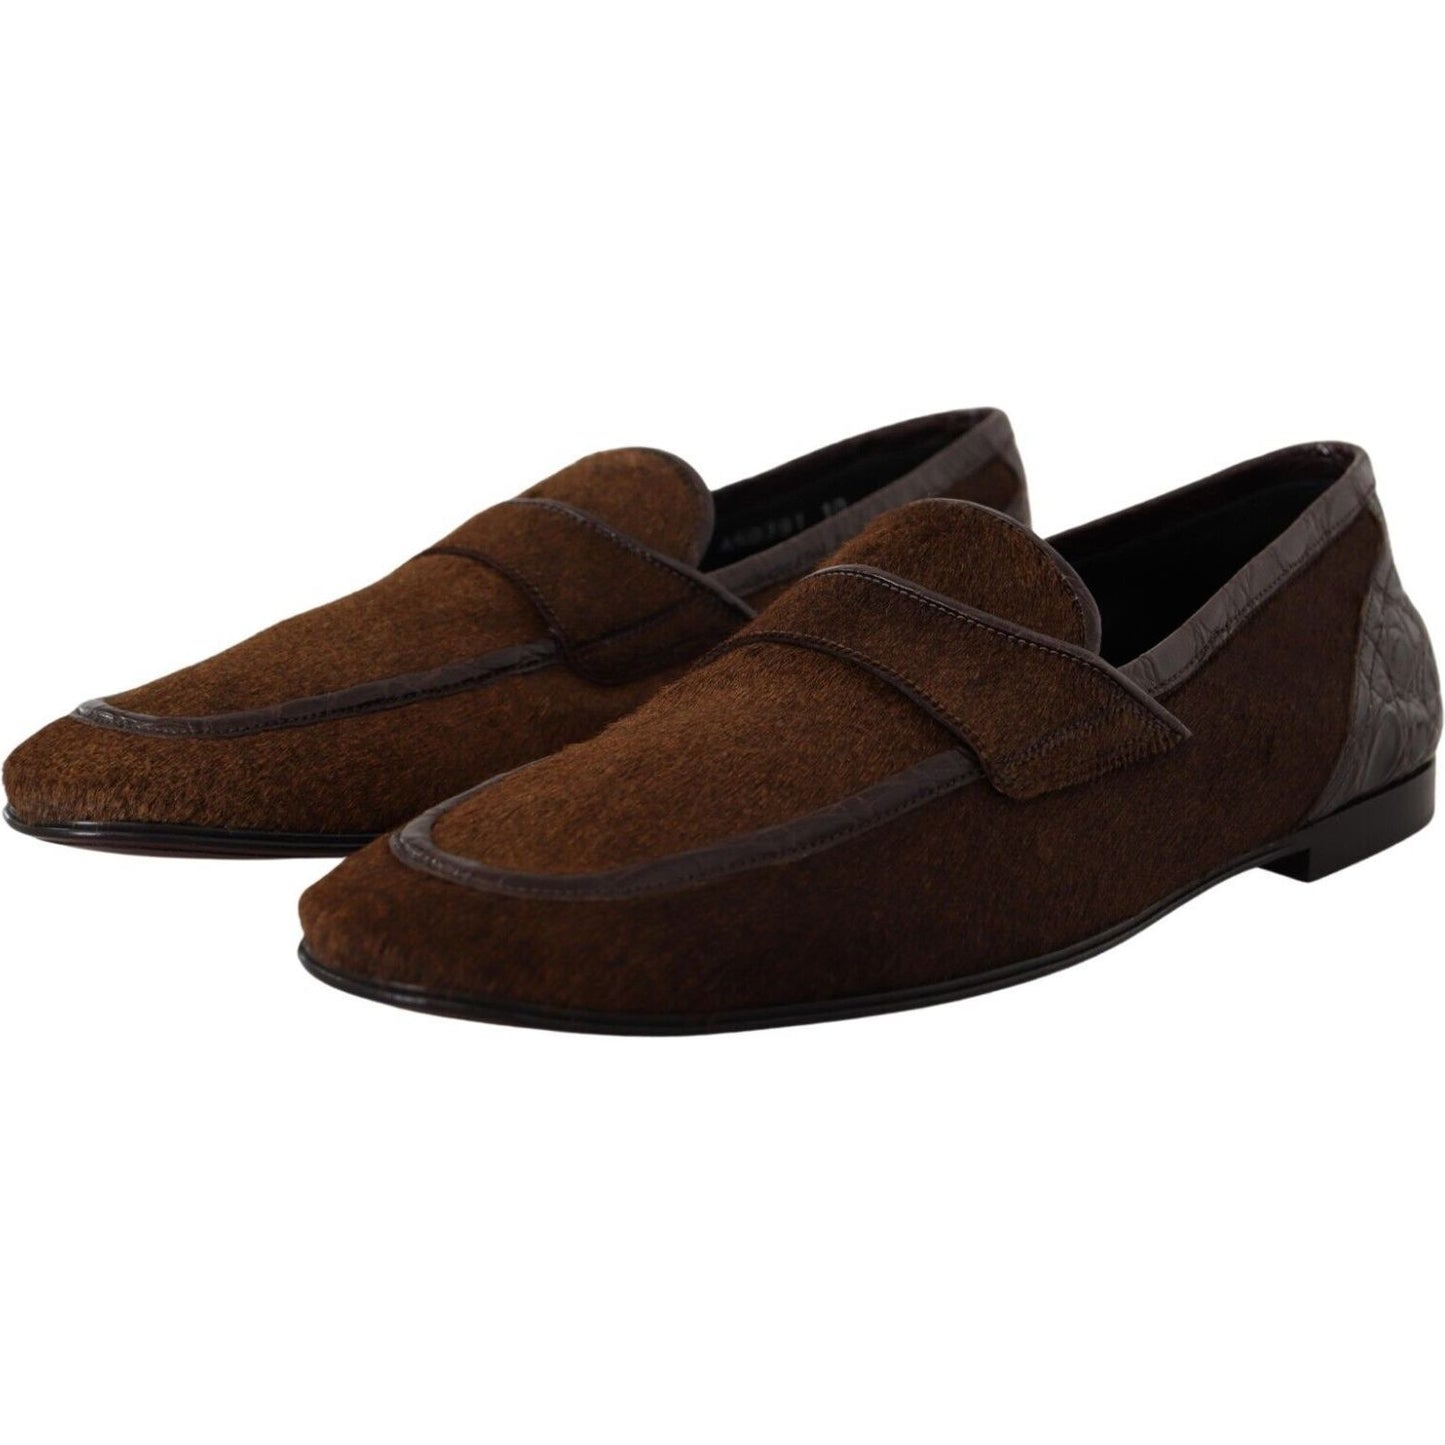 Dolce & Gabbana Exquisite Exotic Leather Loafers brown-exotic-leather-mens-slip-on-loafers-shoes s-l1600-17-7-aab05949-89e.jpg